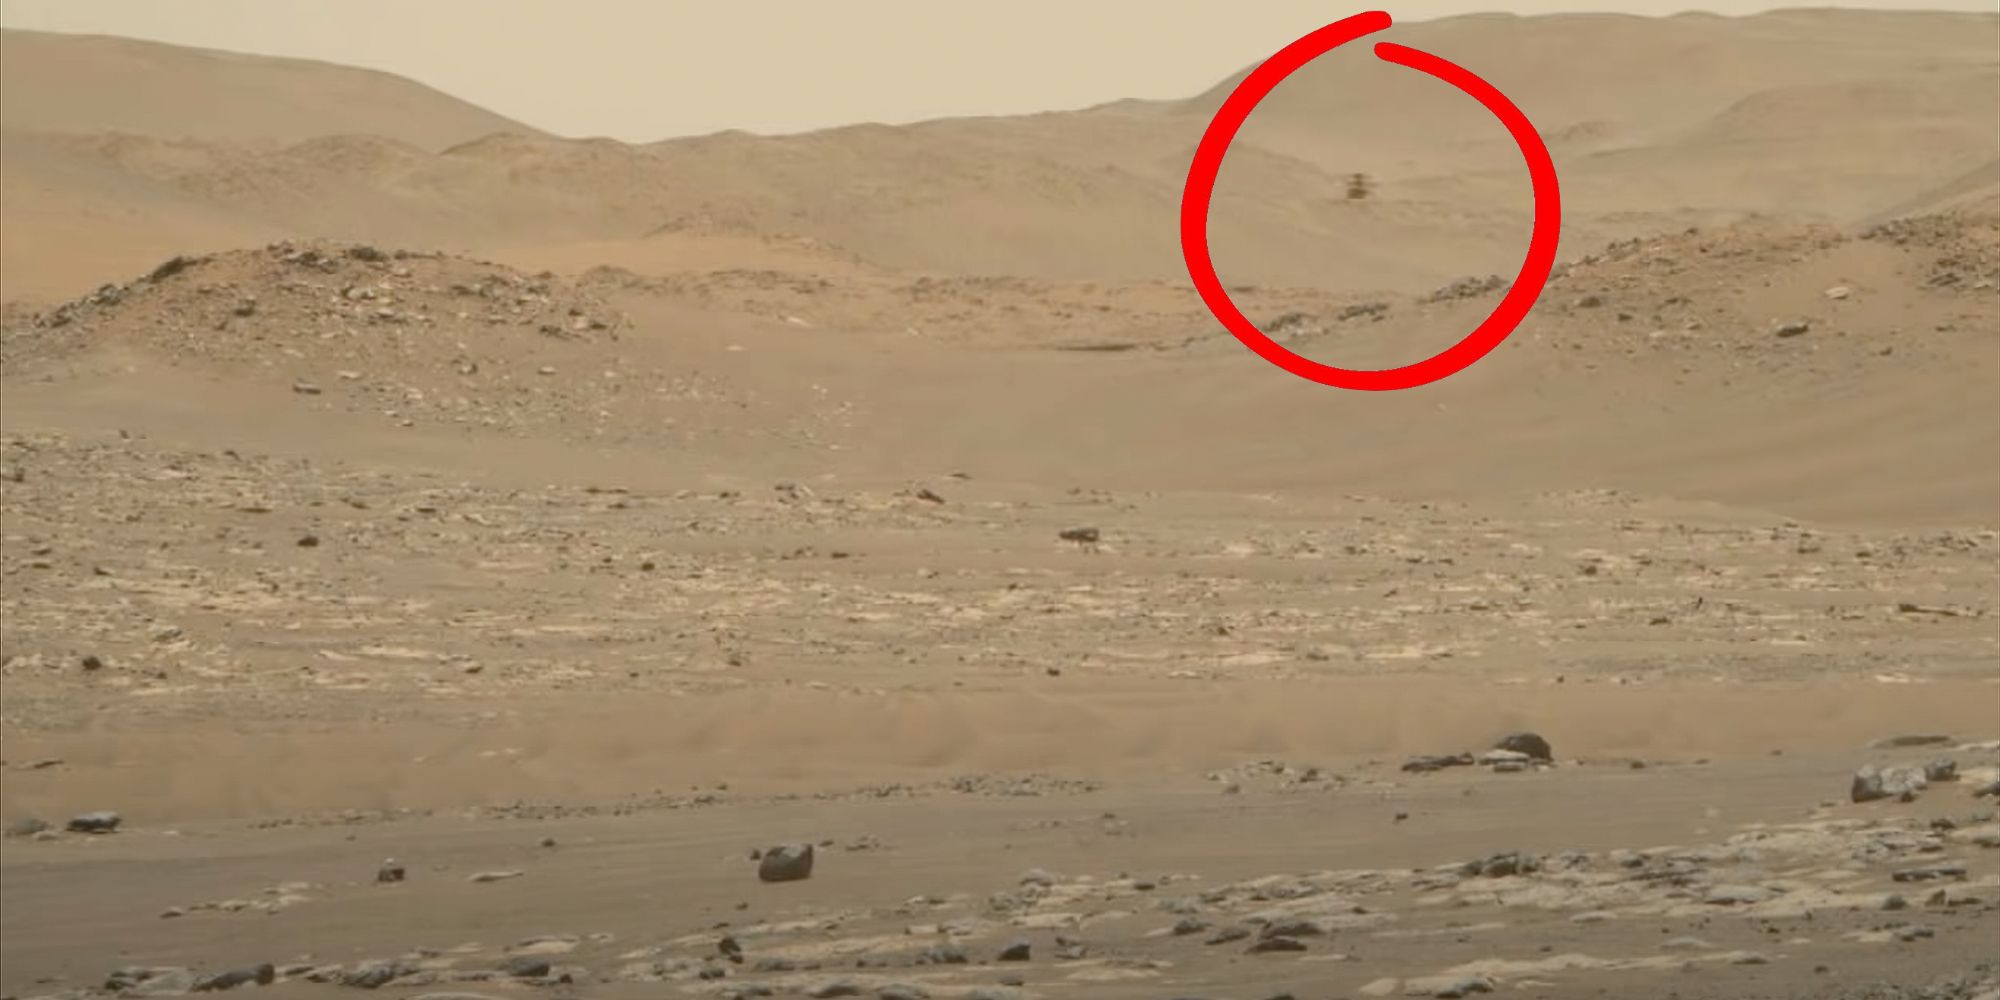 Still image from a video of Ingenuity flying on Mars